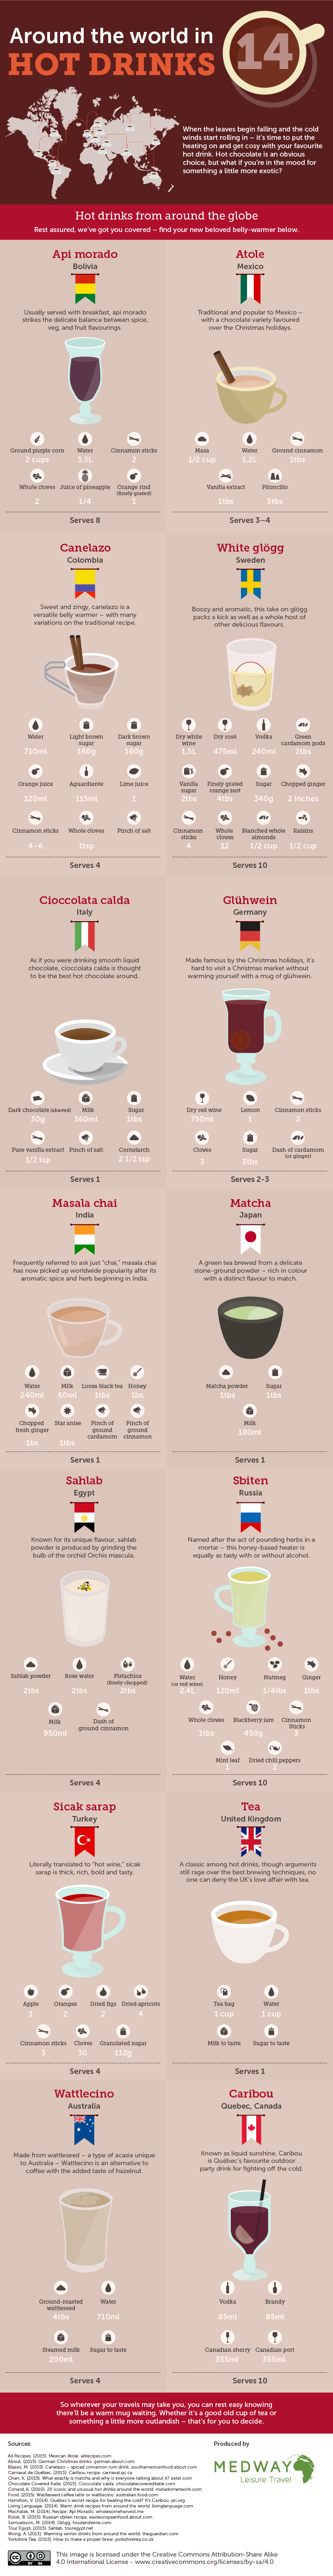 Around-the-world-in-14-hot-drinks-V2